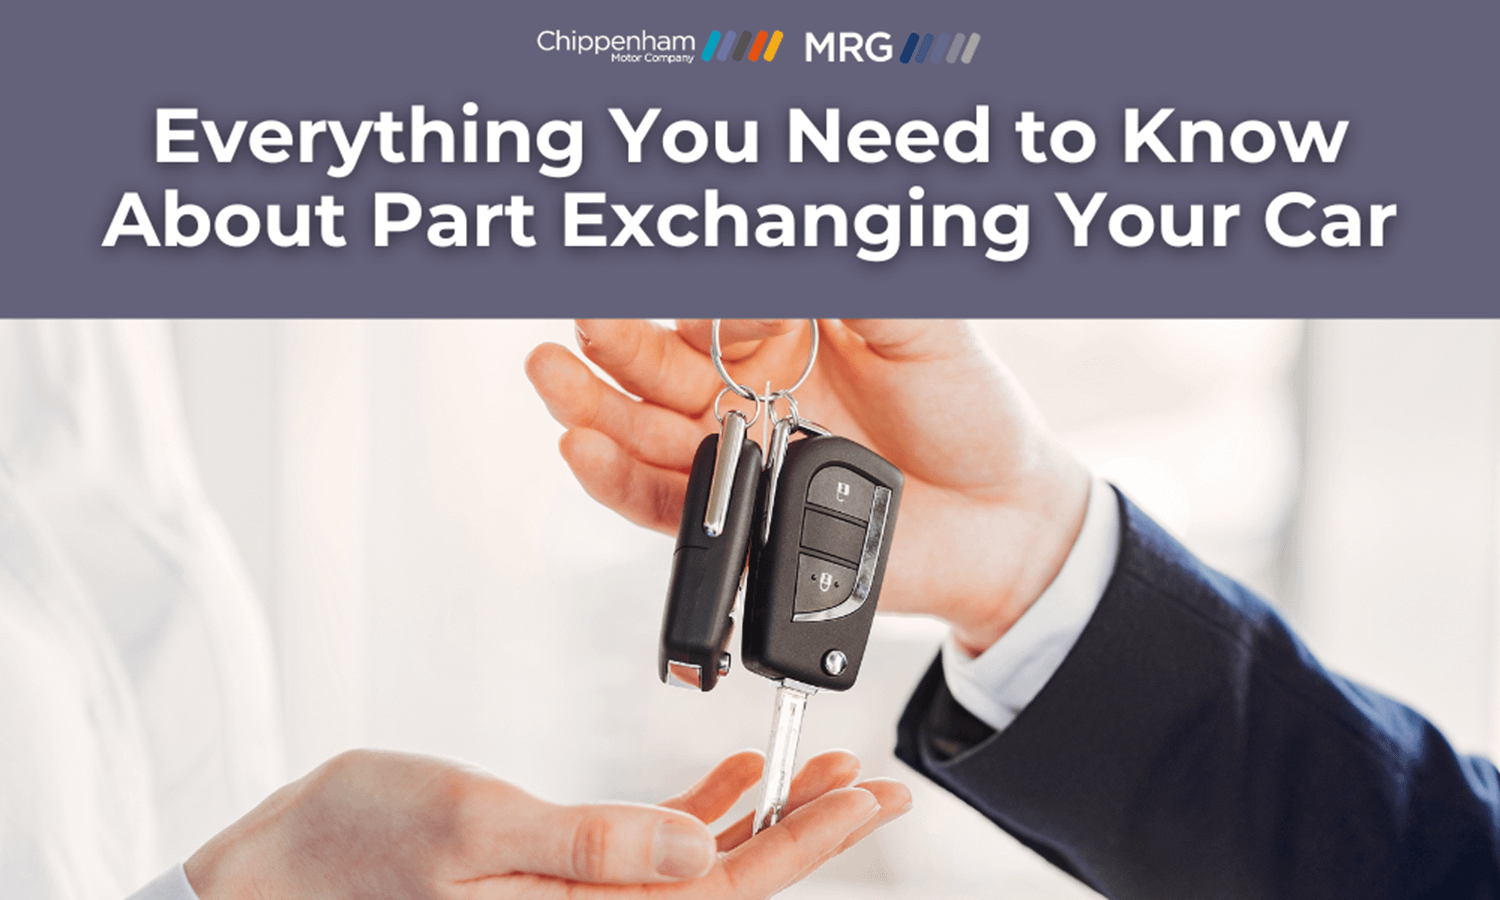 Everything you need to know about part exchanging your car